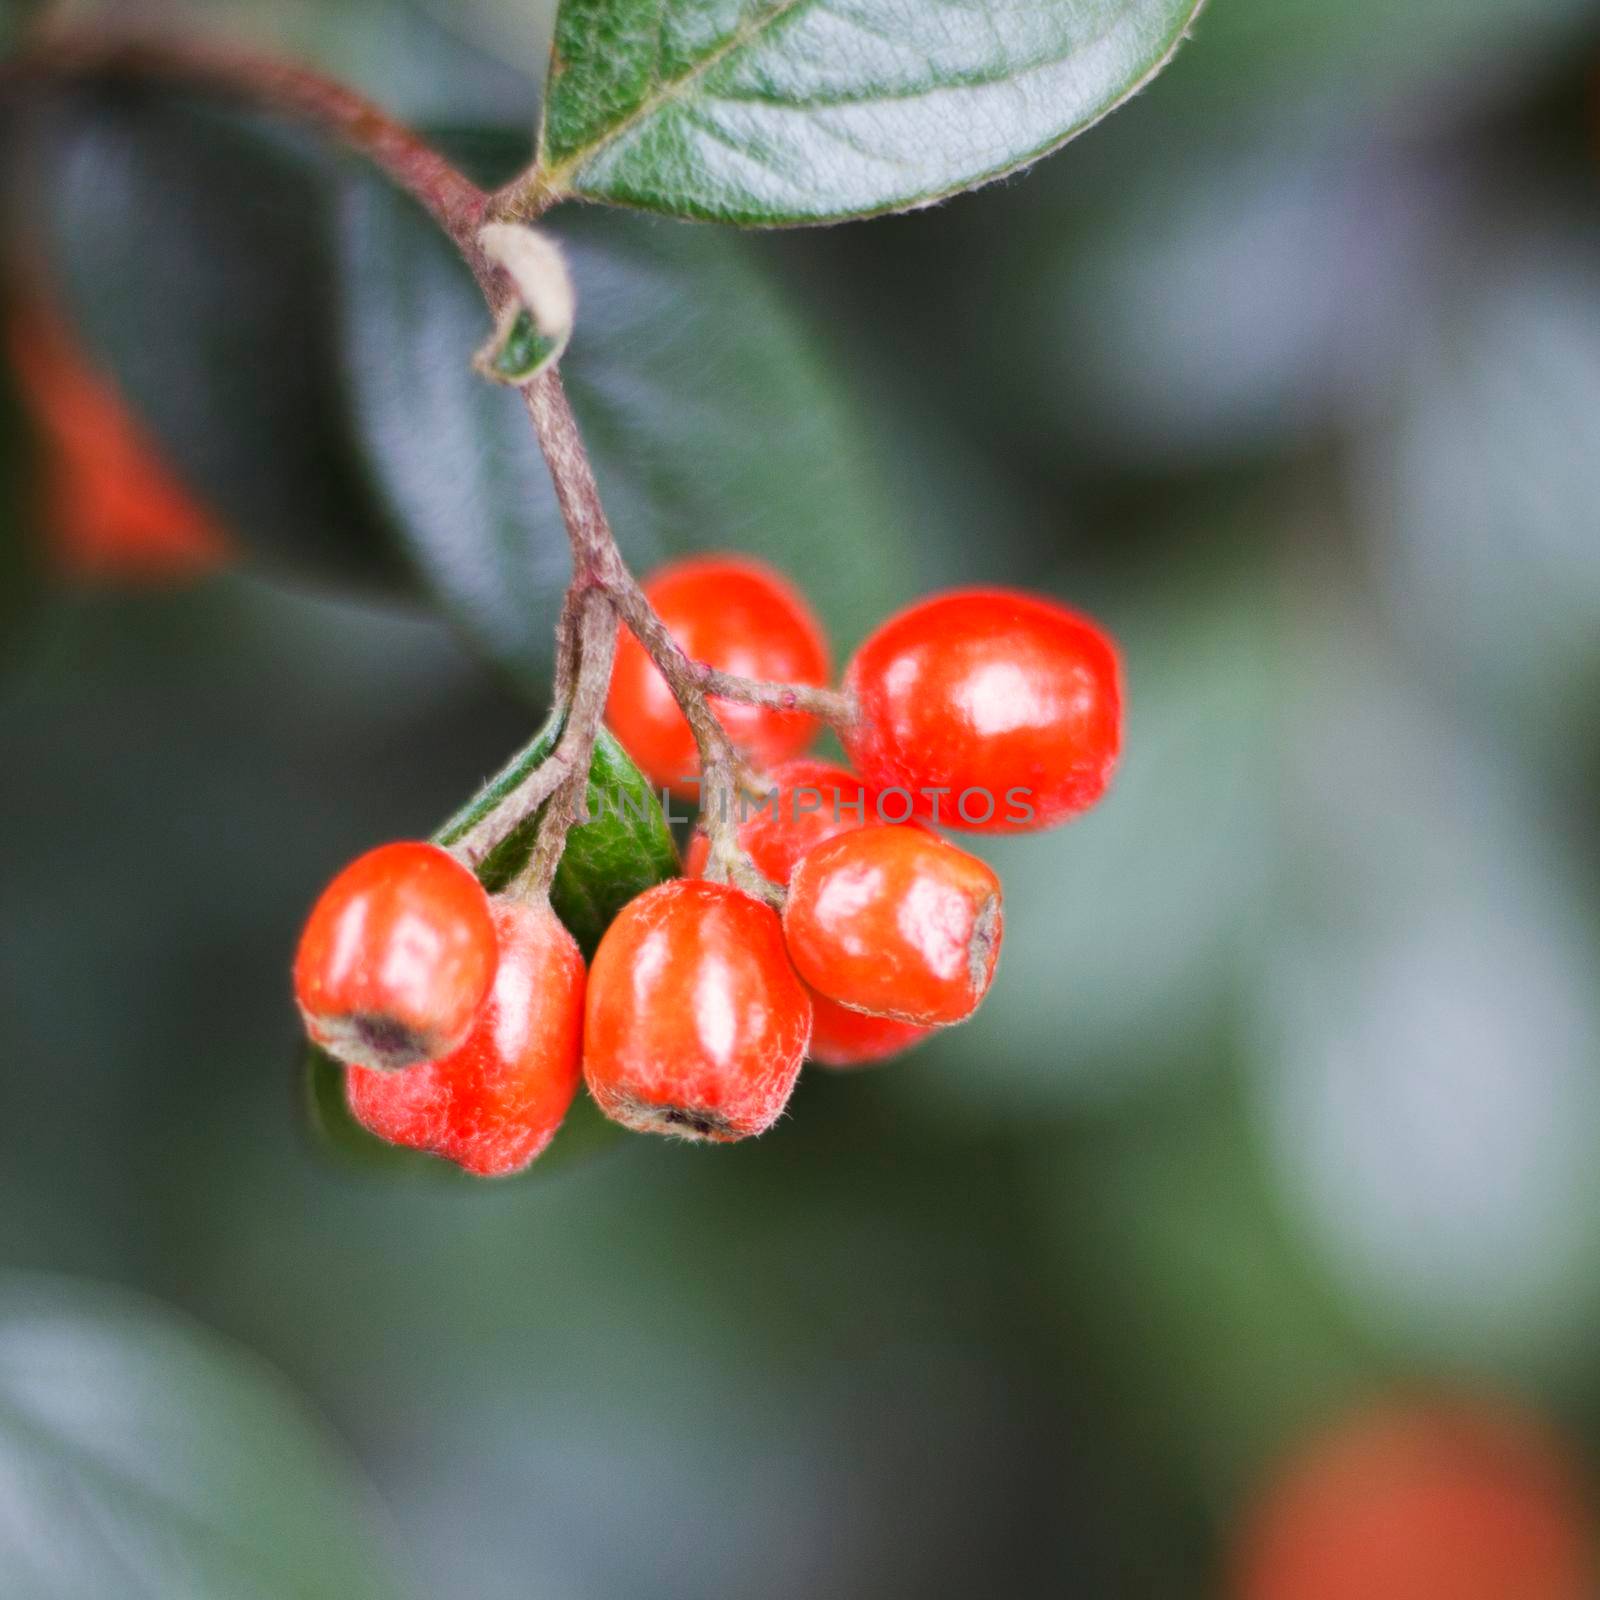 Red berries by Bwise